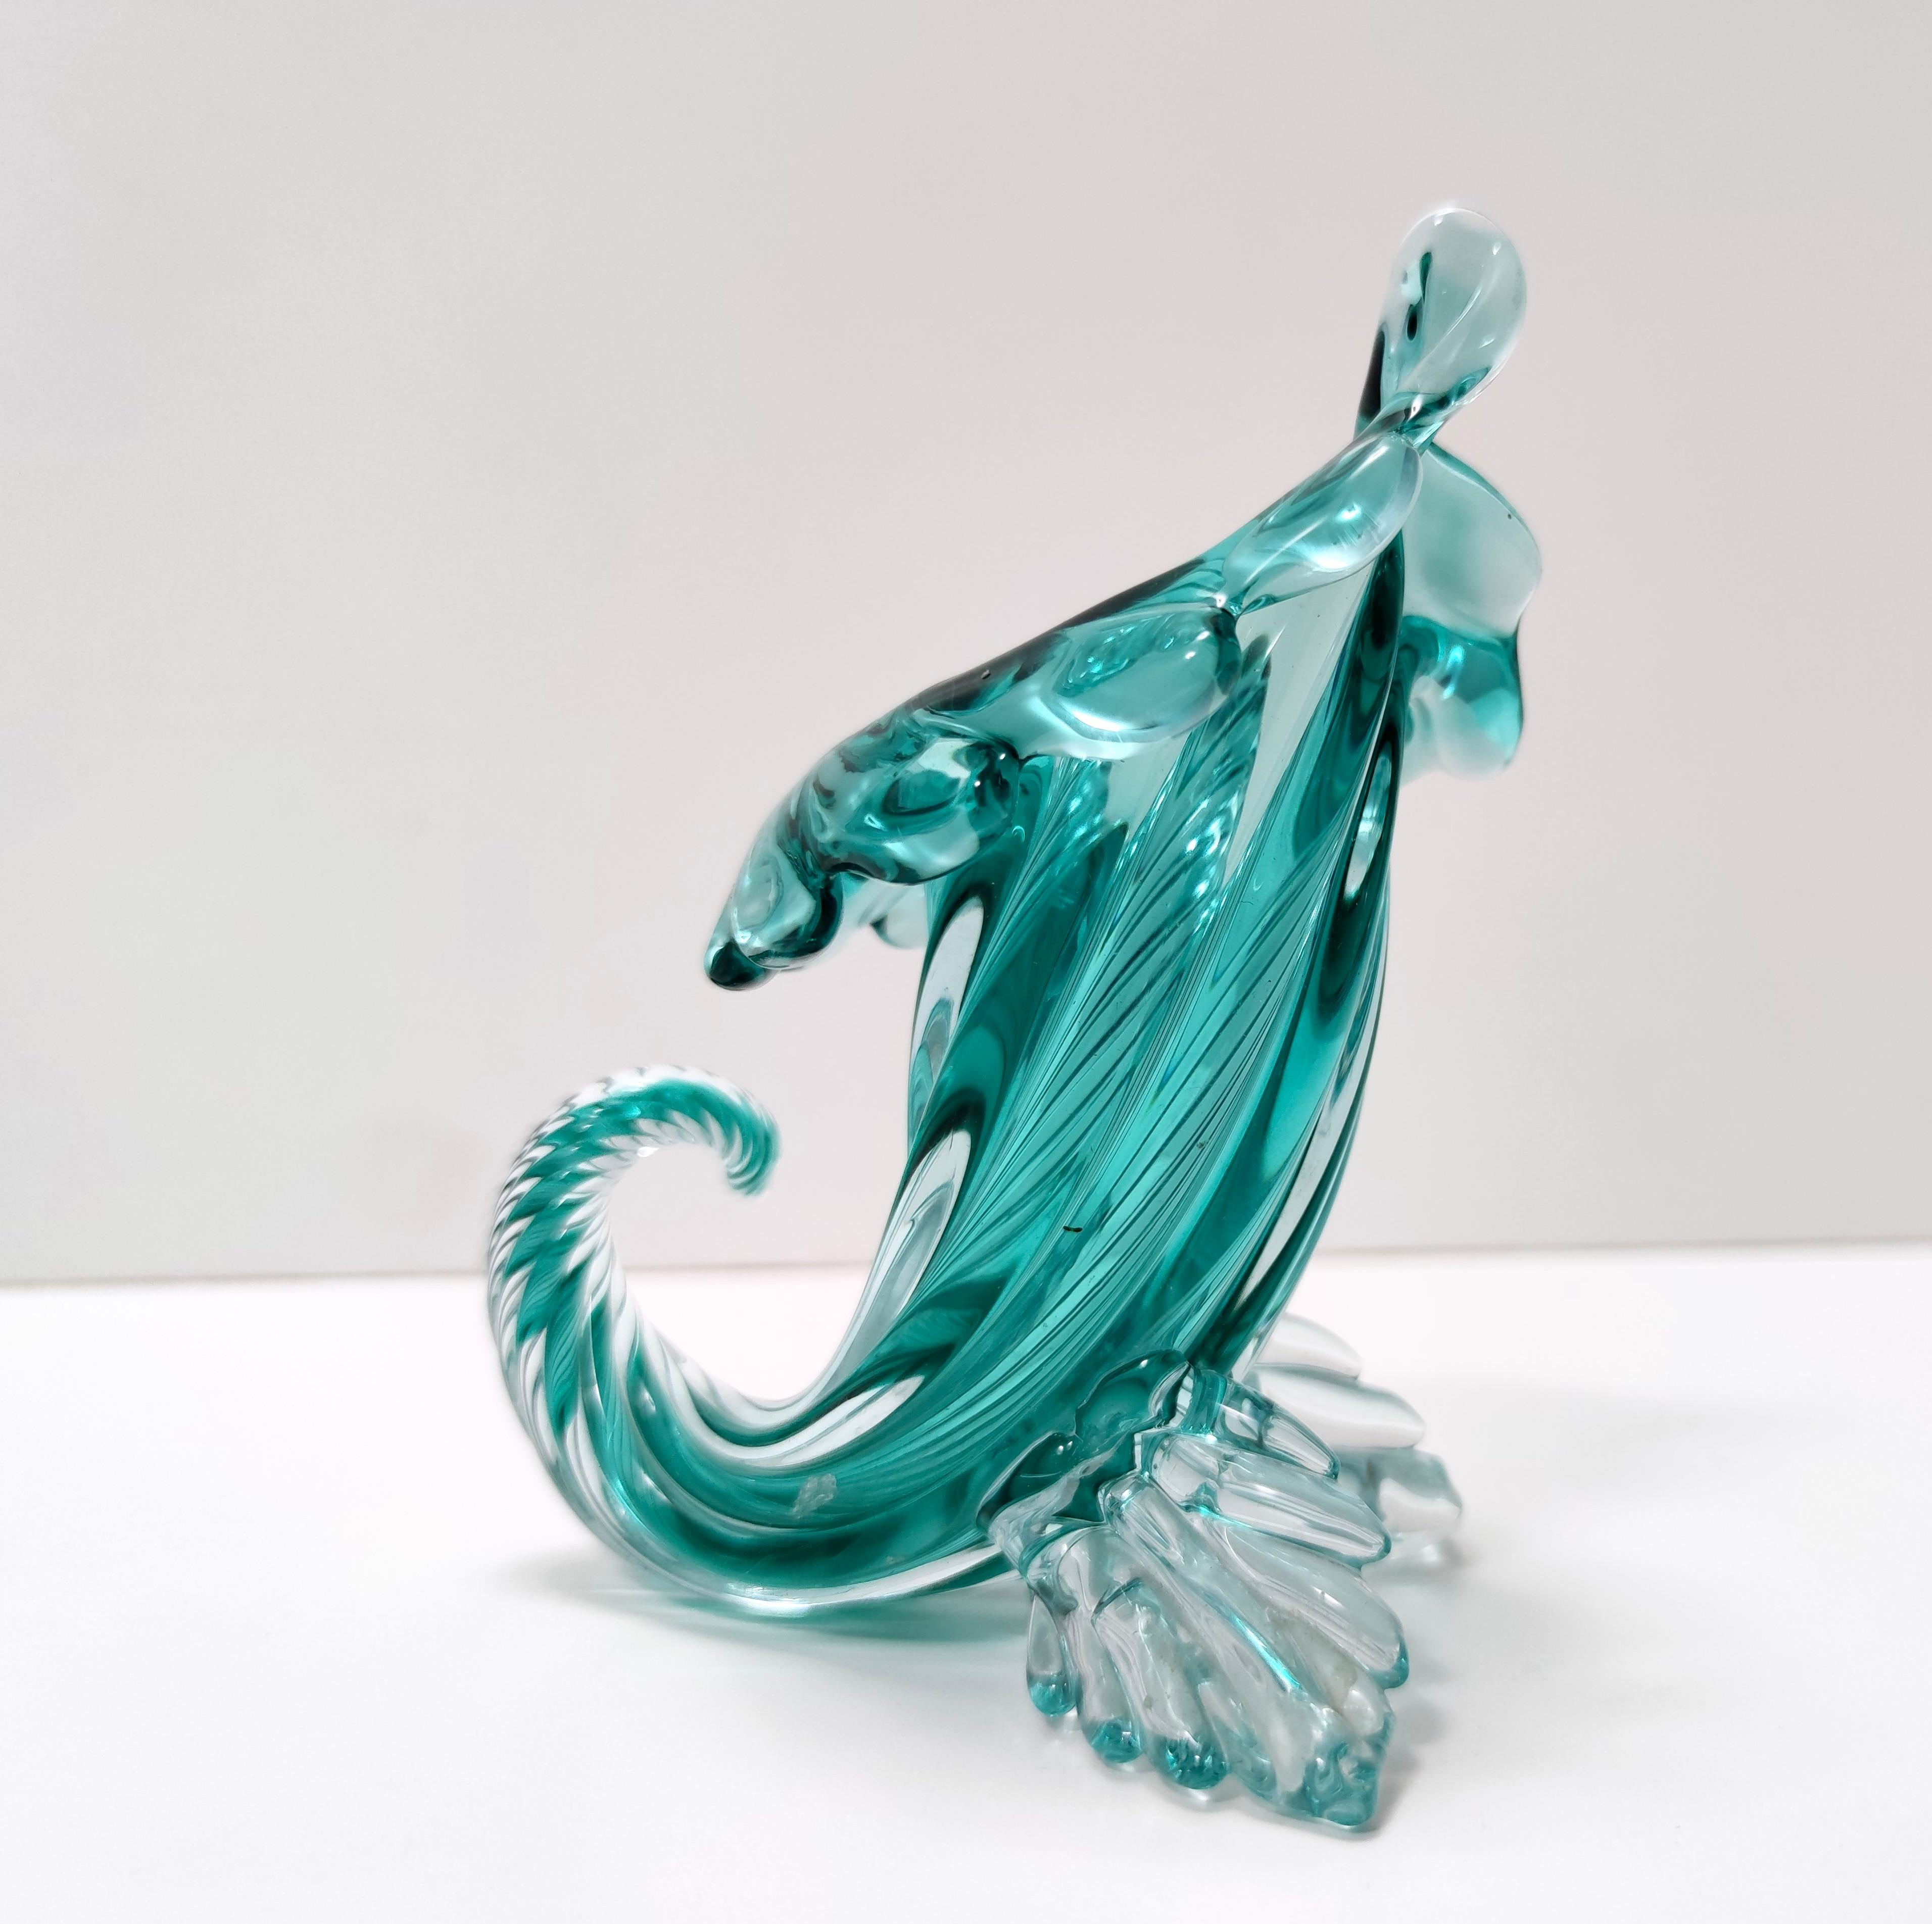 Mid-20th Century Vintage Teal Murano Glass Cornucopia Vase by Archimede Seguso, Italy For Sale